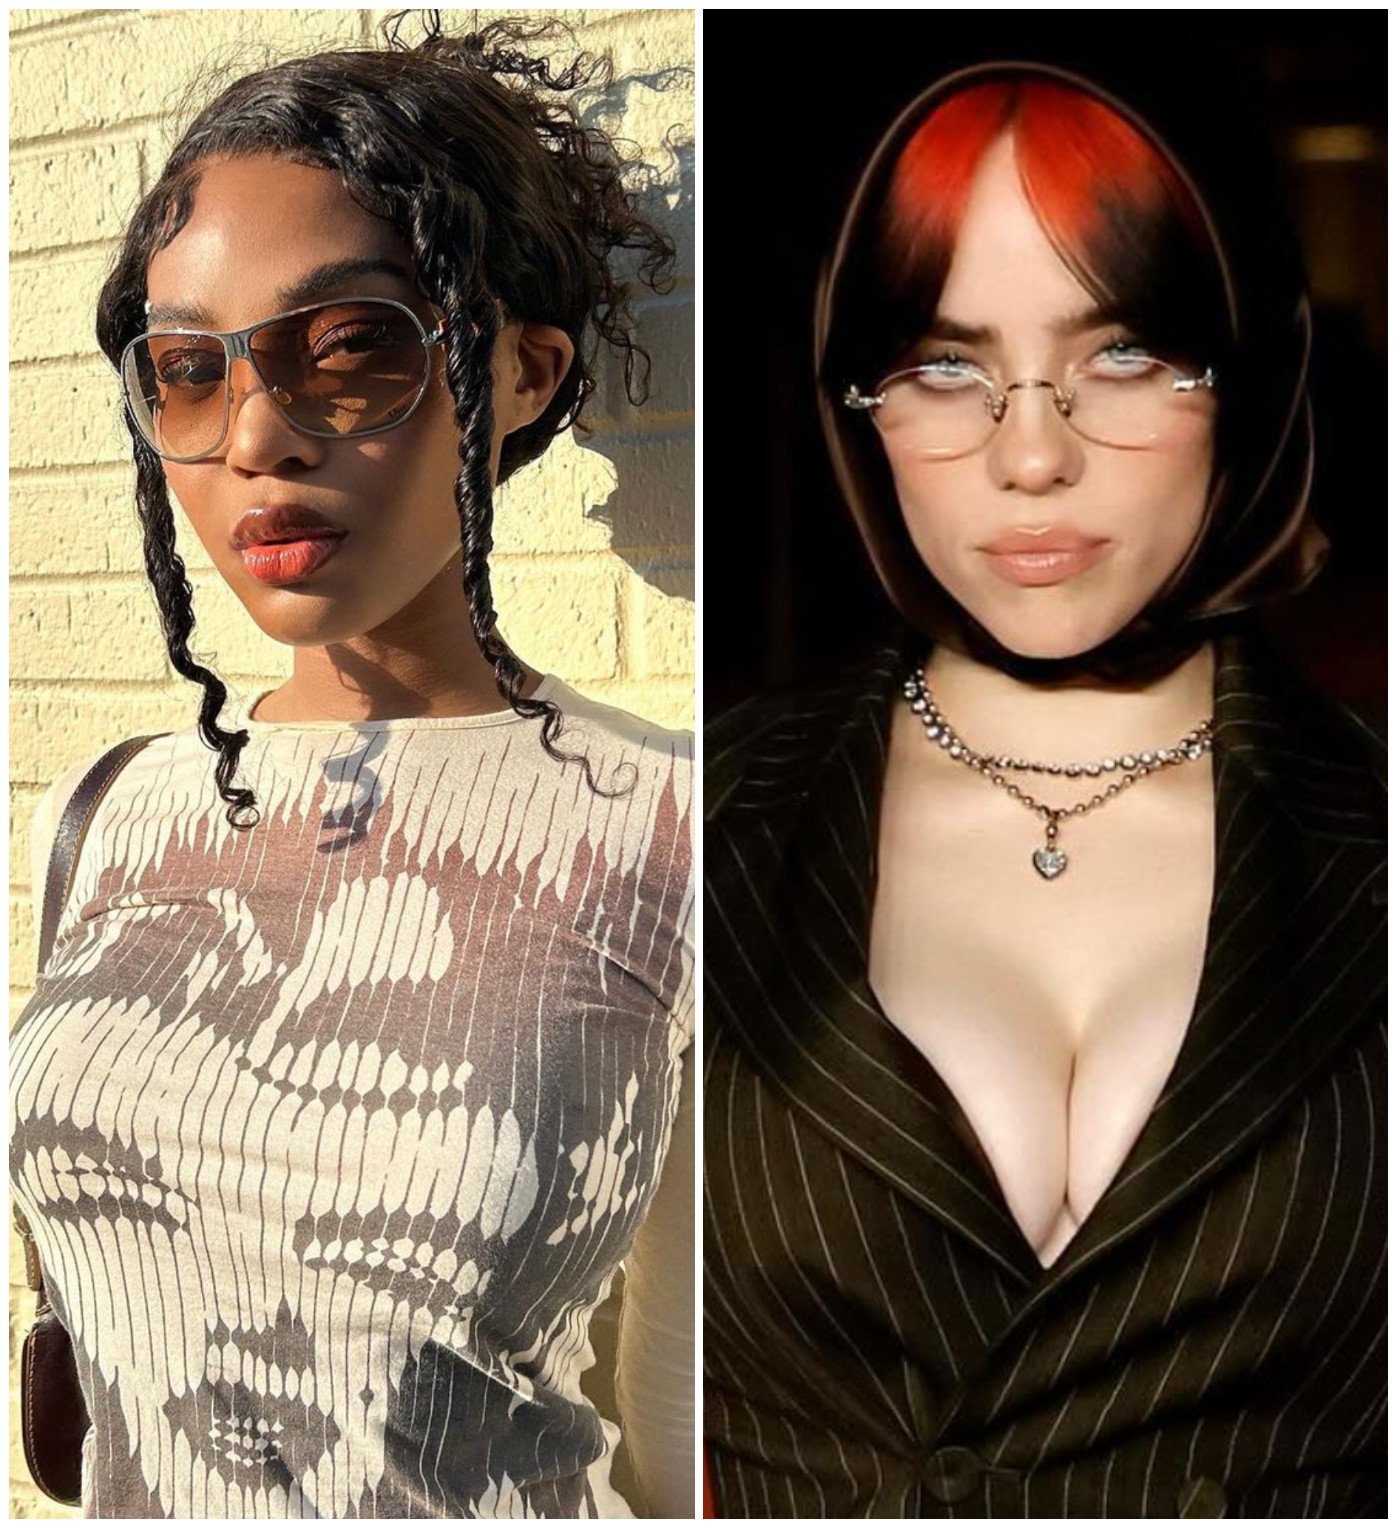 Quenlin Blackwell was recently spotted kissing Billie Eilish at Coachella. Photos: @quenblackwell, @billieeilish/Instagram